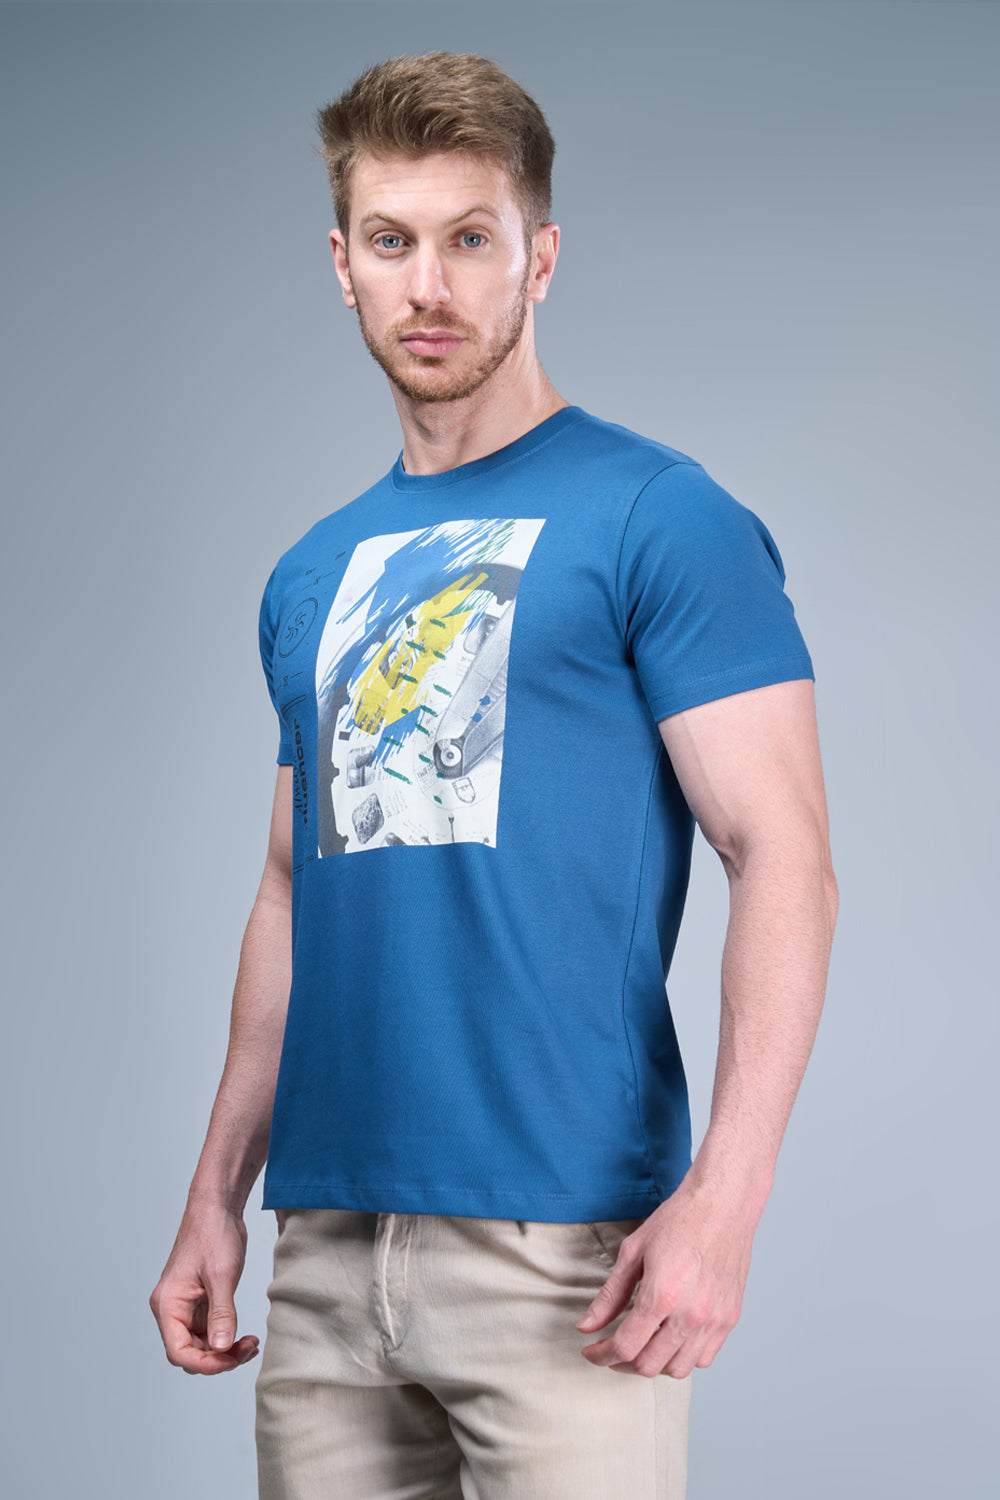 Blue colored, cotton Graphic T shirt for men, half sleeves and round neck, side view.